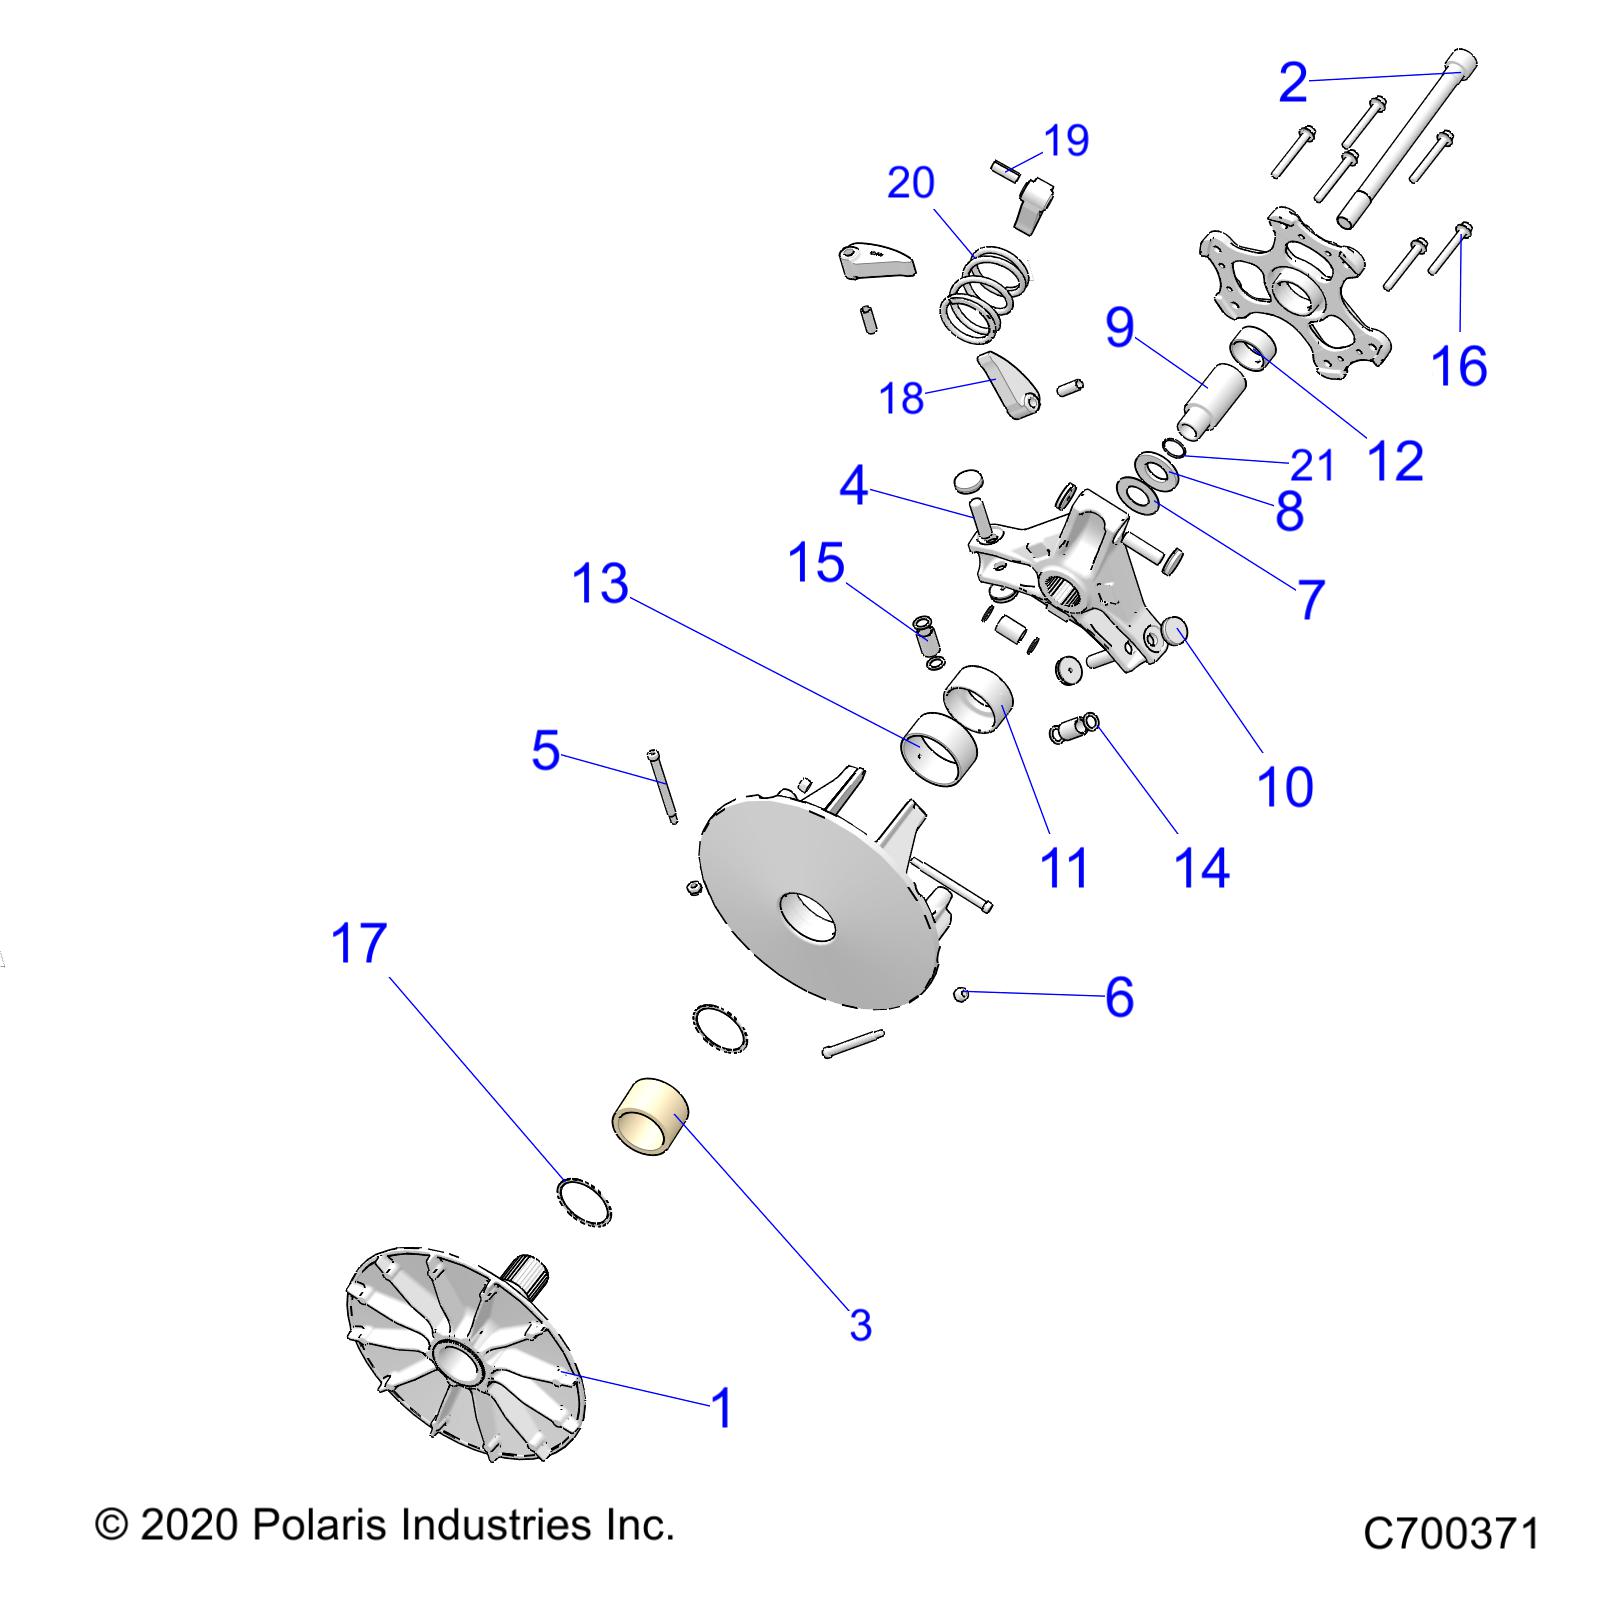 Part Number : 1327162 ASM-DRIVE CLUTCH BASIC P90X